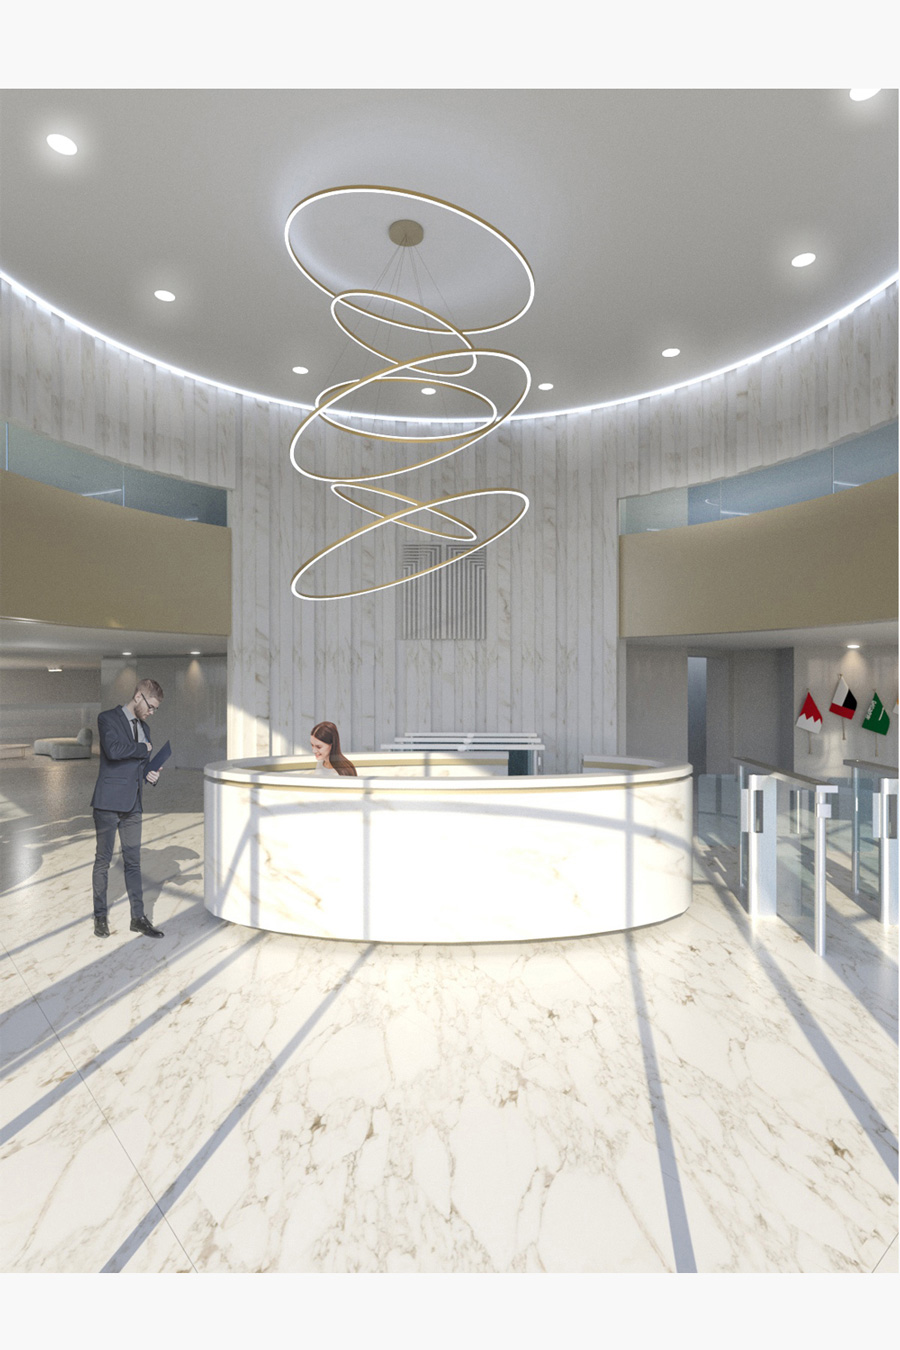 Reception area of an insurance company offices in Bahrain.